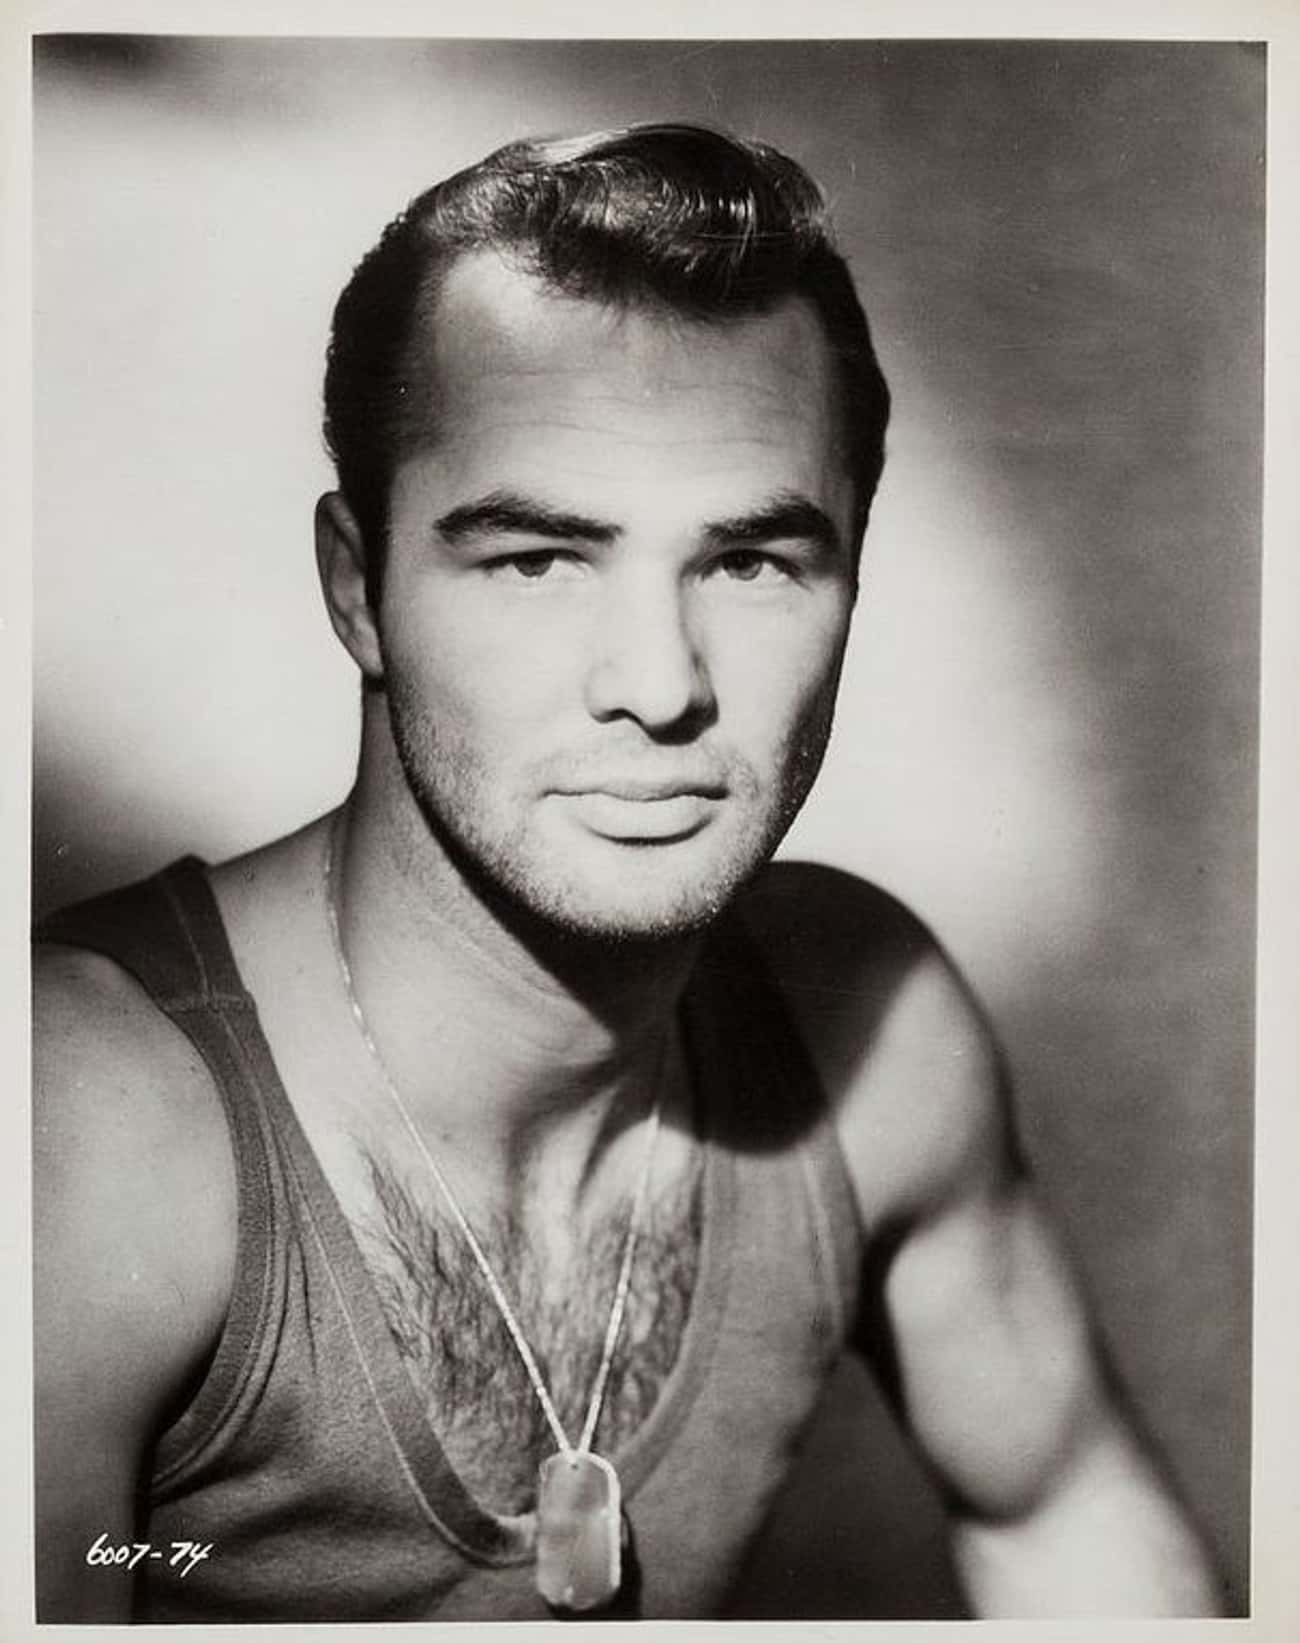 Young Burt Reynolds in a Tank Top